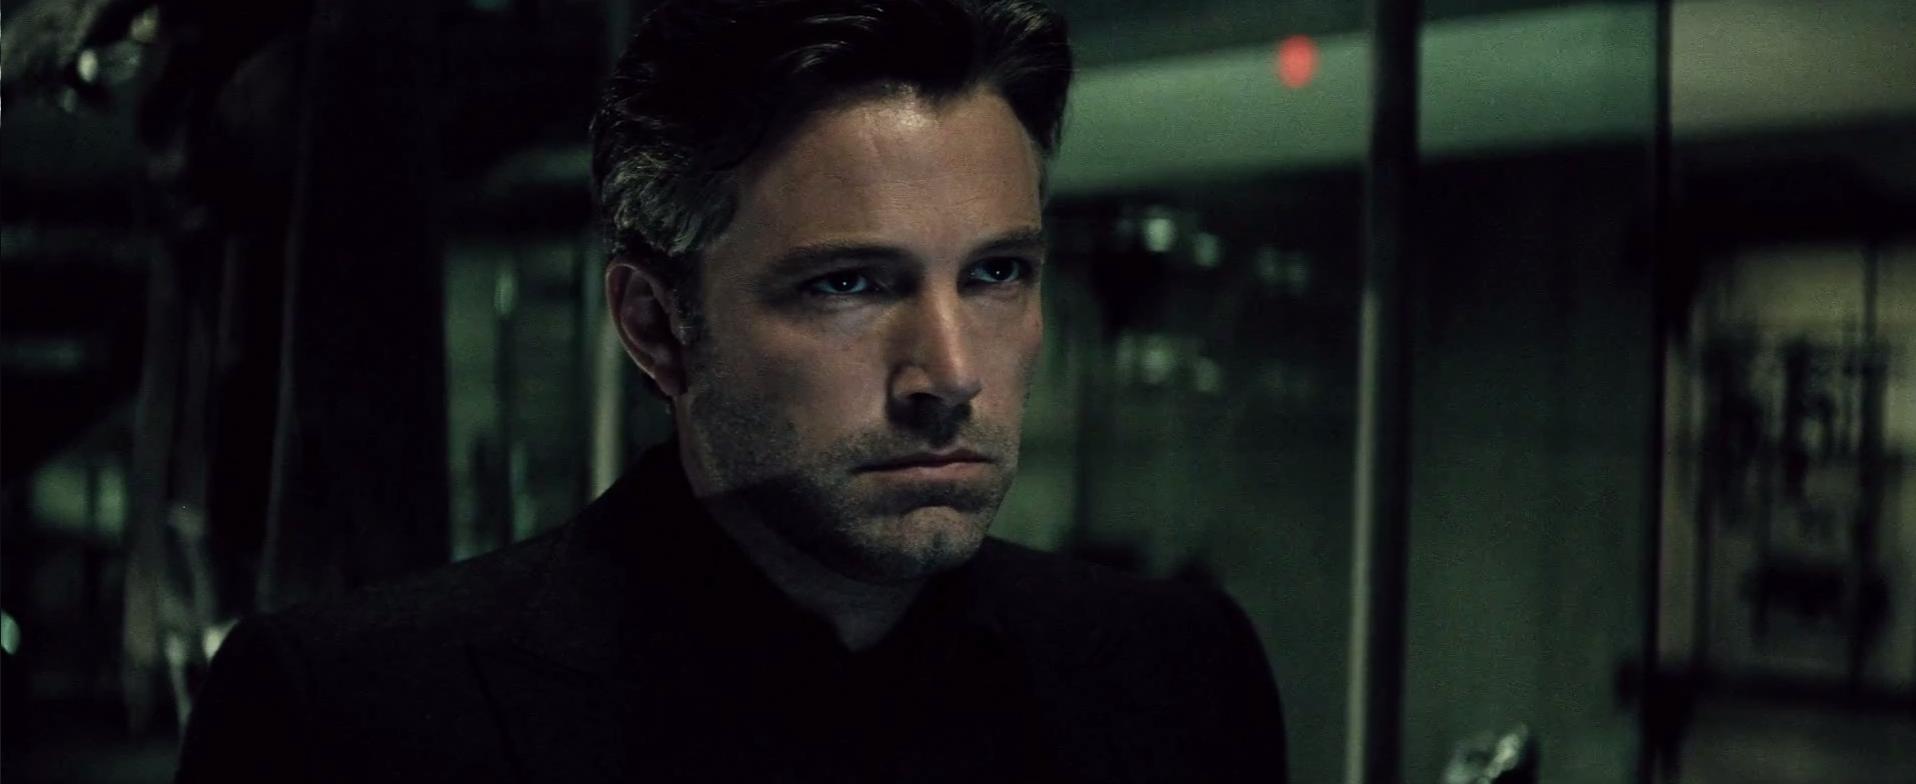 Ben Affleck Reported To Be Co-Writing and Directing His Own Batman Film